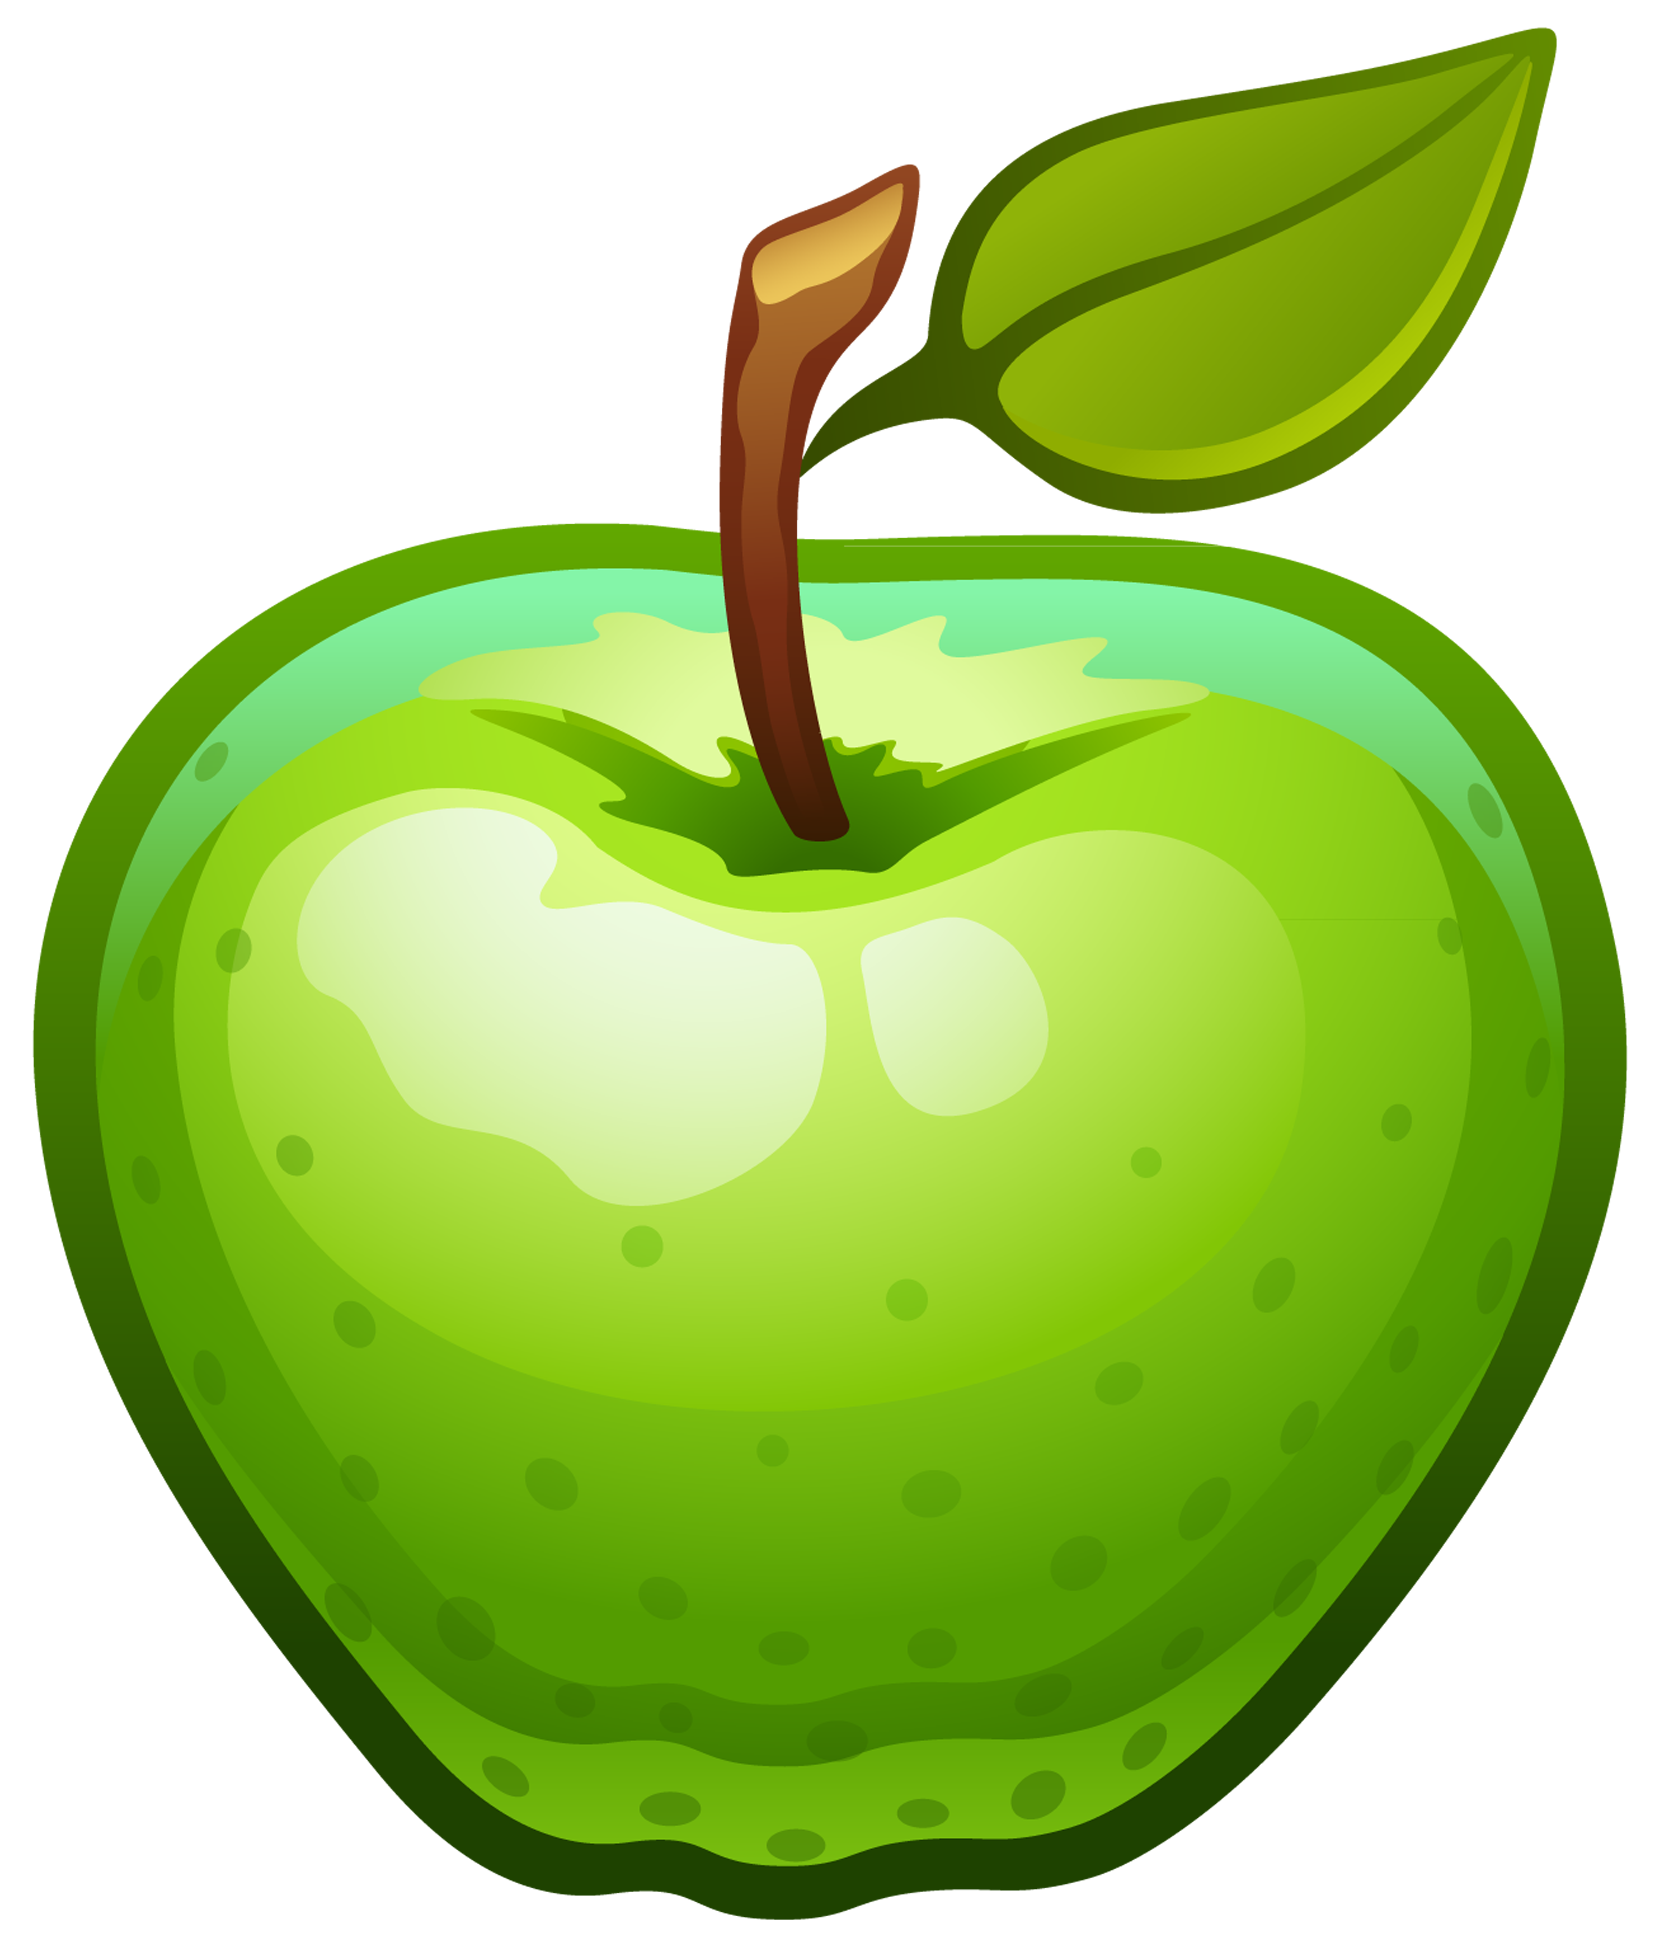 Green Apple Clipart Free Wikiclipart